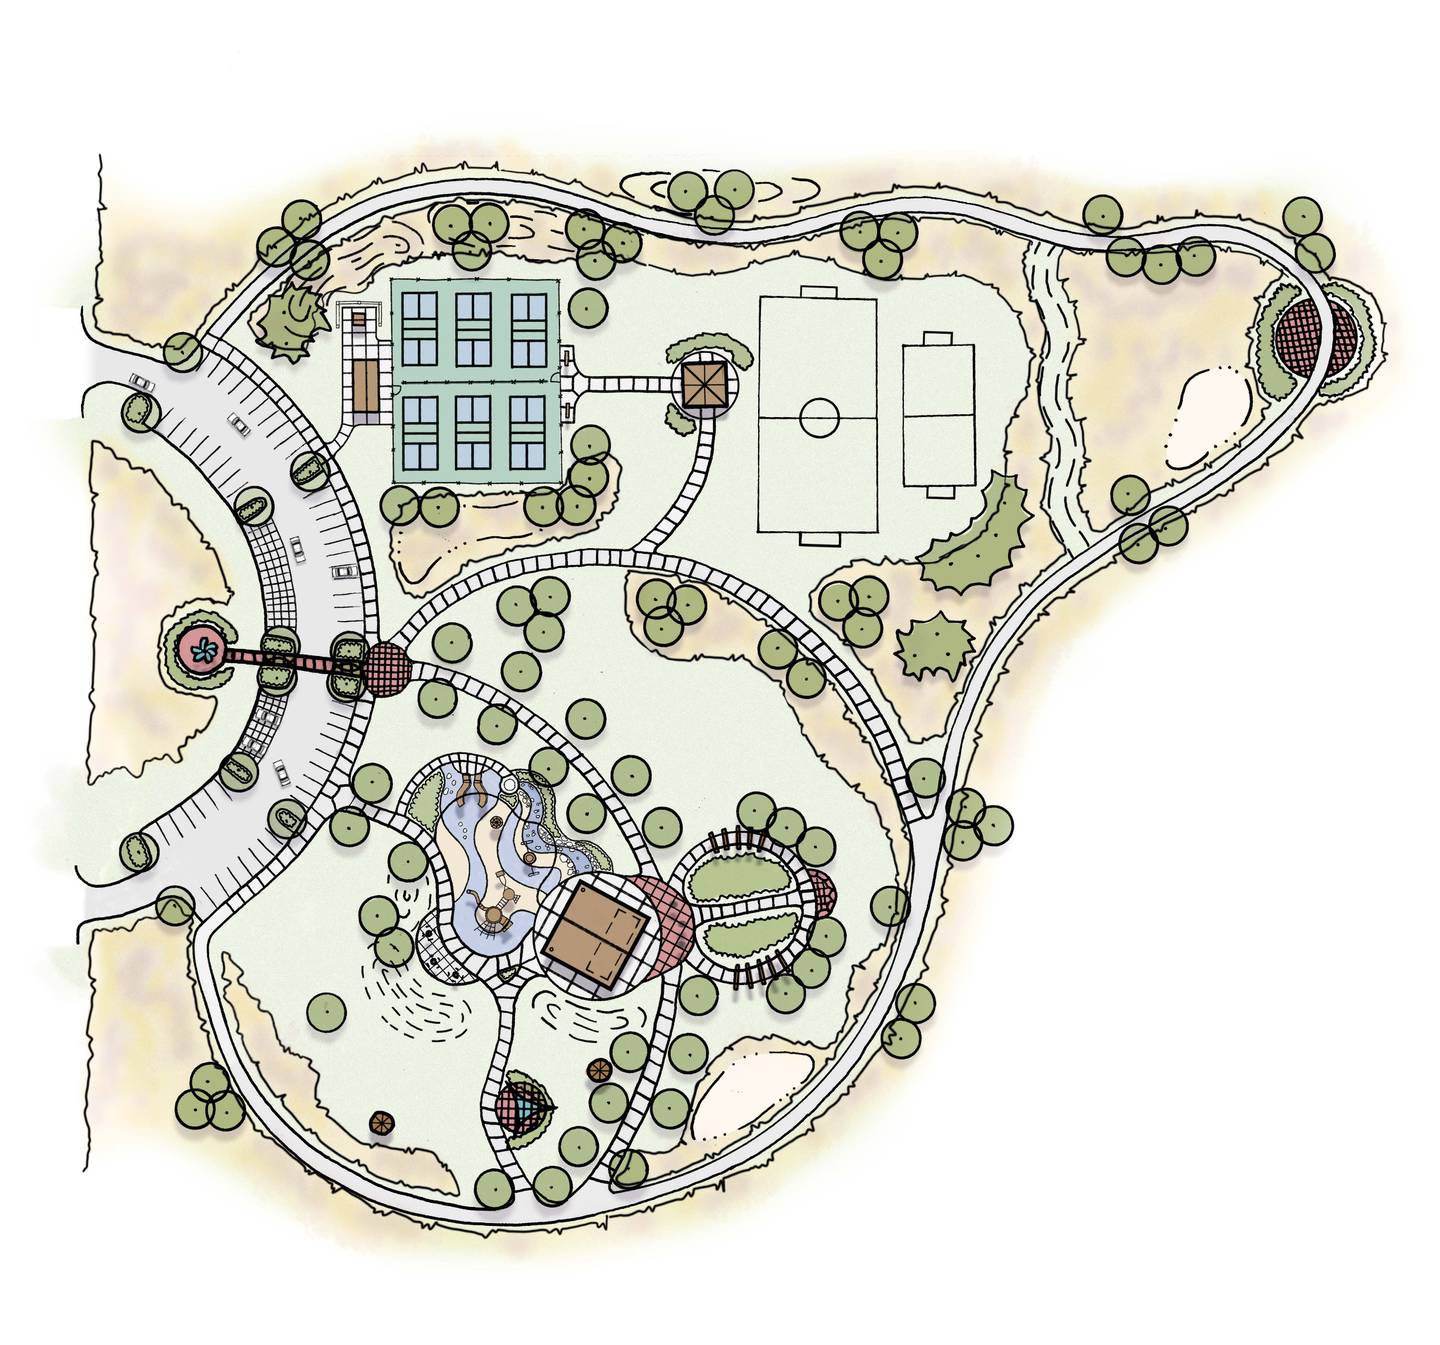 Photographs and designs, such as the playground shown here, are ideas for the "organic flow" concept for the planned Haligus Road park, shown at a meeting on Tuesday, March 1, 2022.